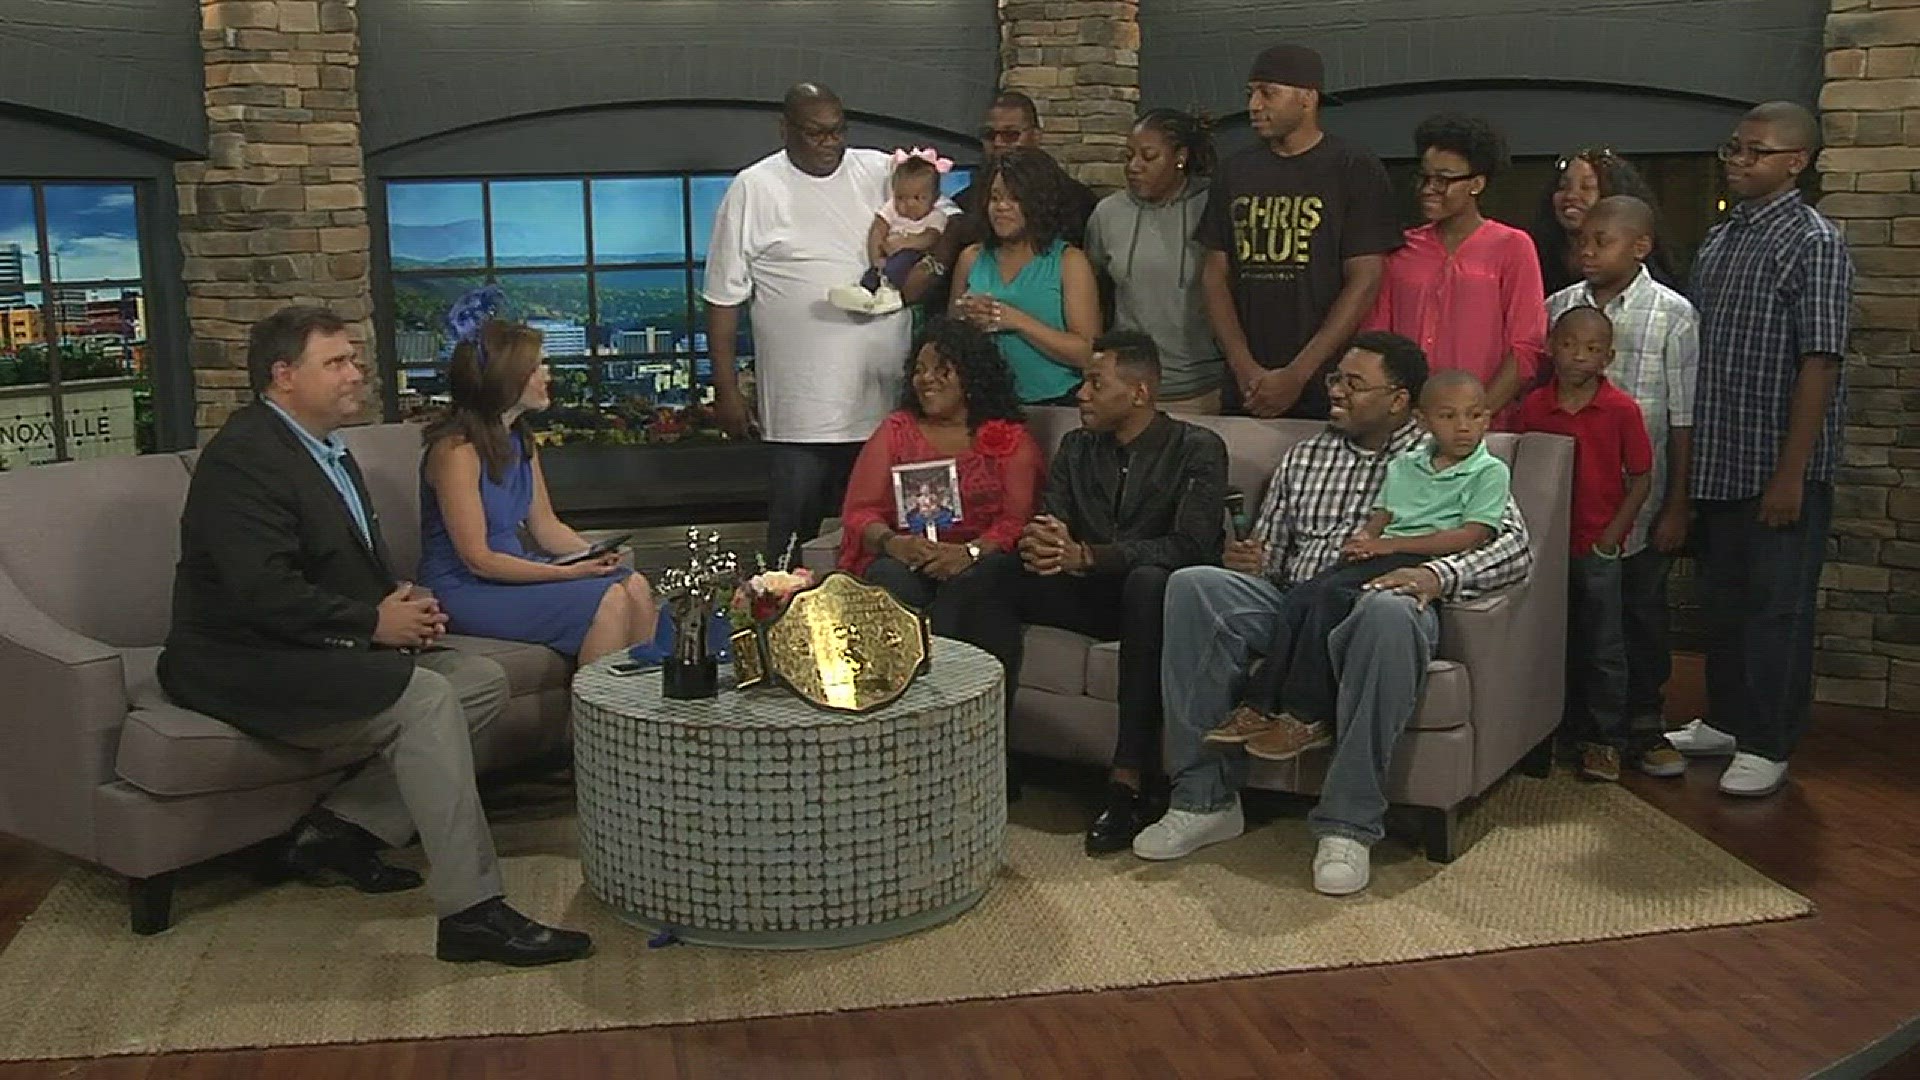 The Voice winner Chris Blue and his very supportive family appeared on WBIR's Live at Five @4 to talk about his Voice win, what's been happening since, and plans for the future.